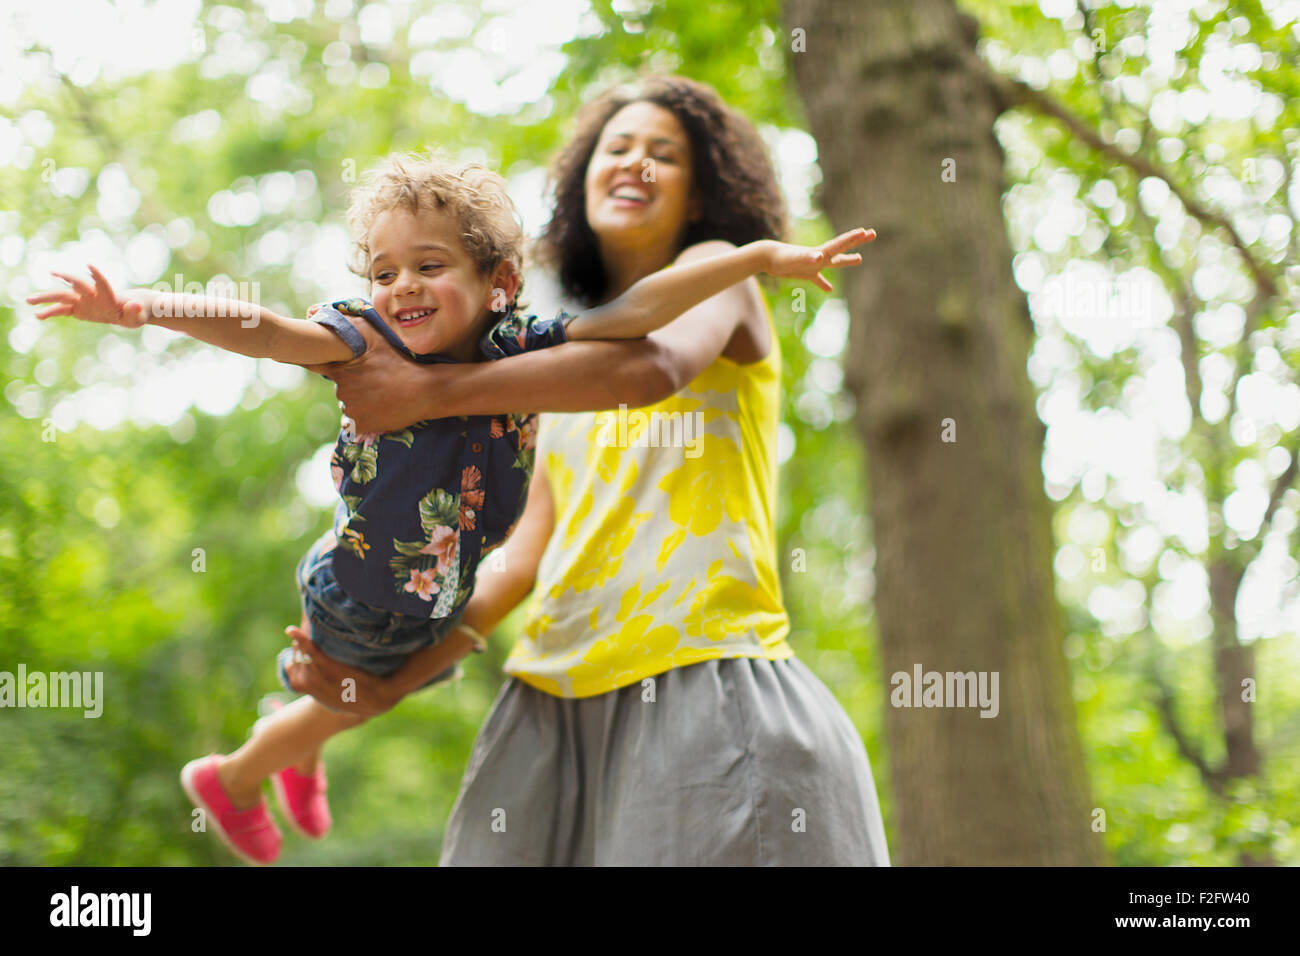 Playful mother flying son under tree Stock Photo